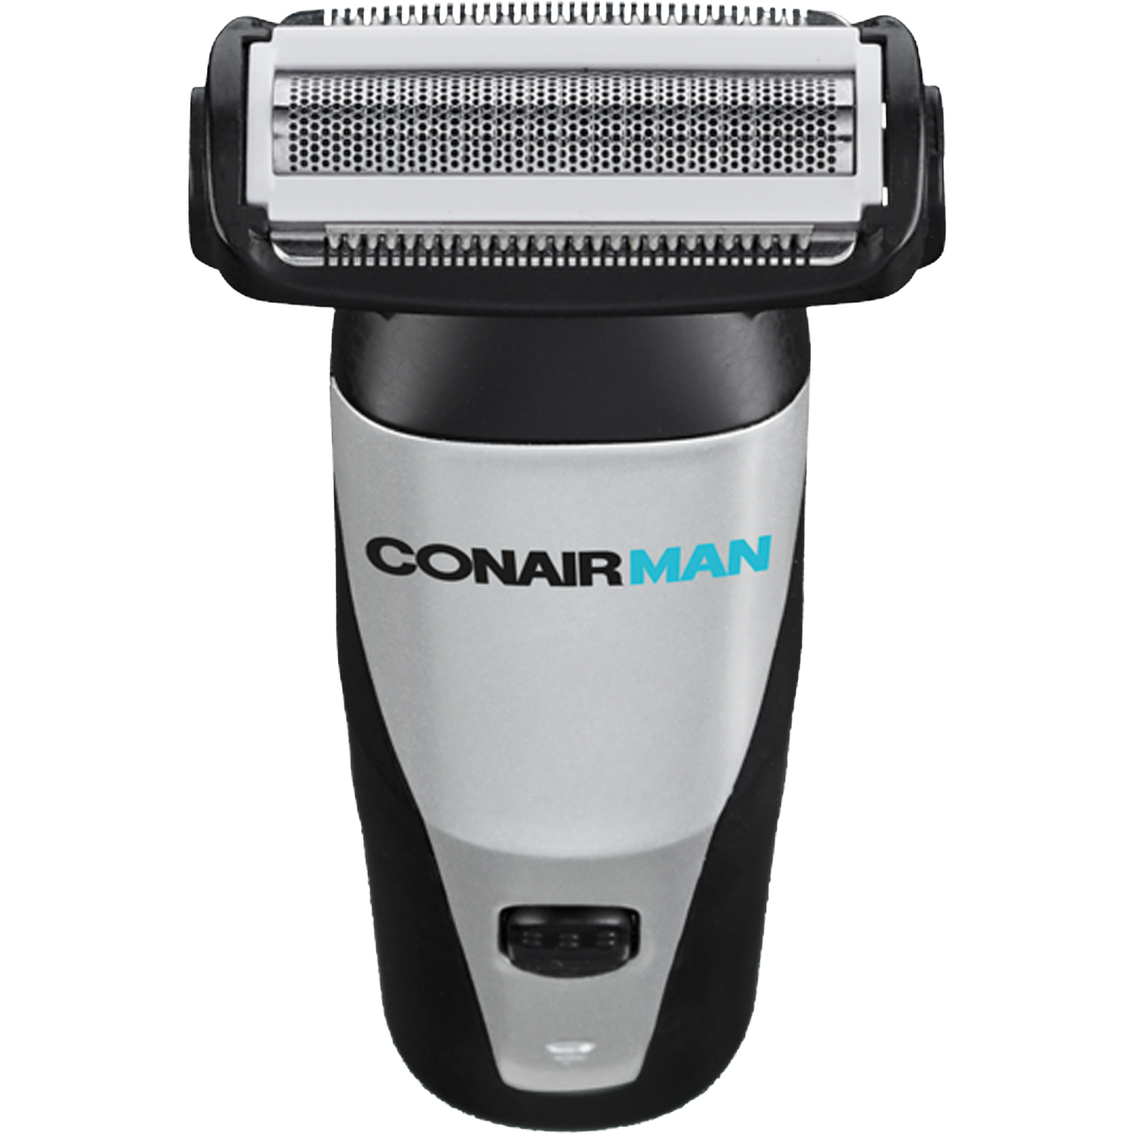 Conair ConairMan All-in-One Face and Body Trimmer - Image 3 of 4